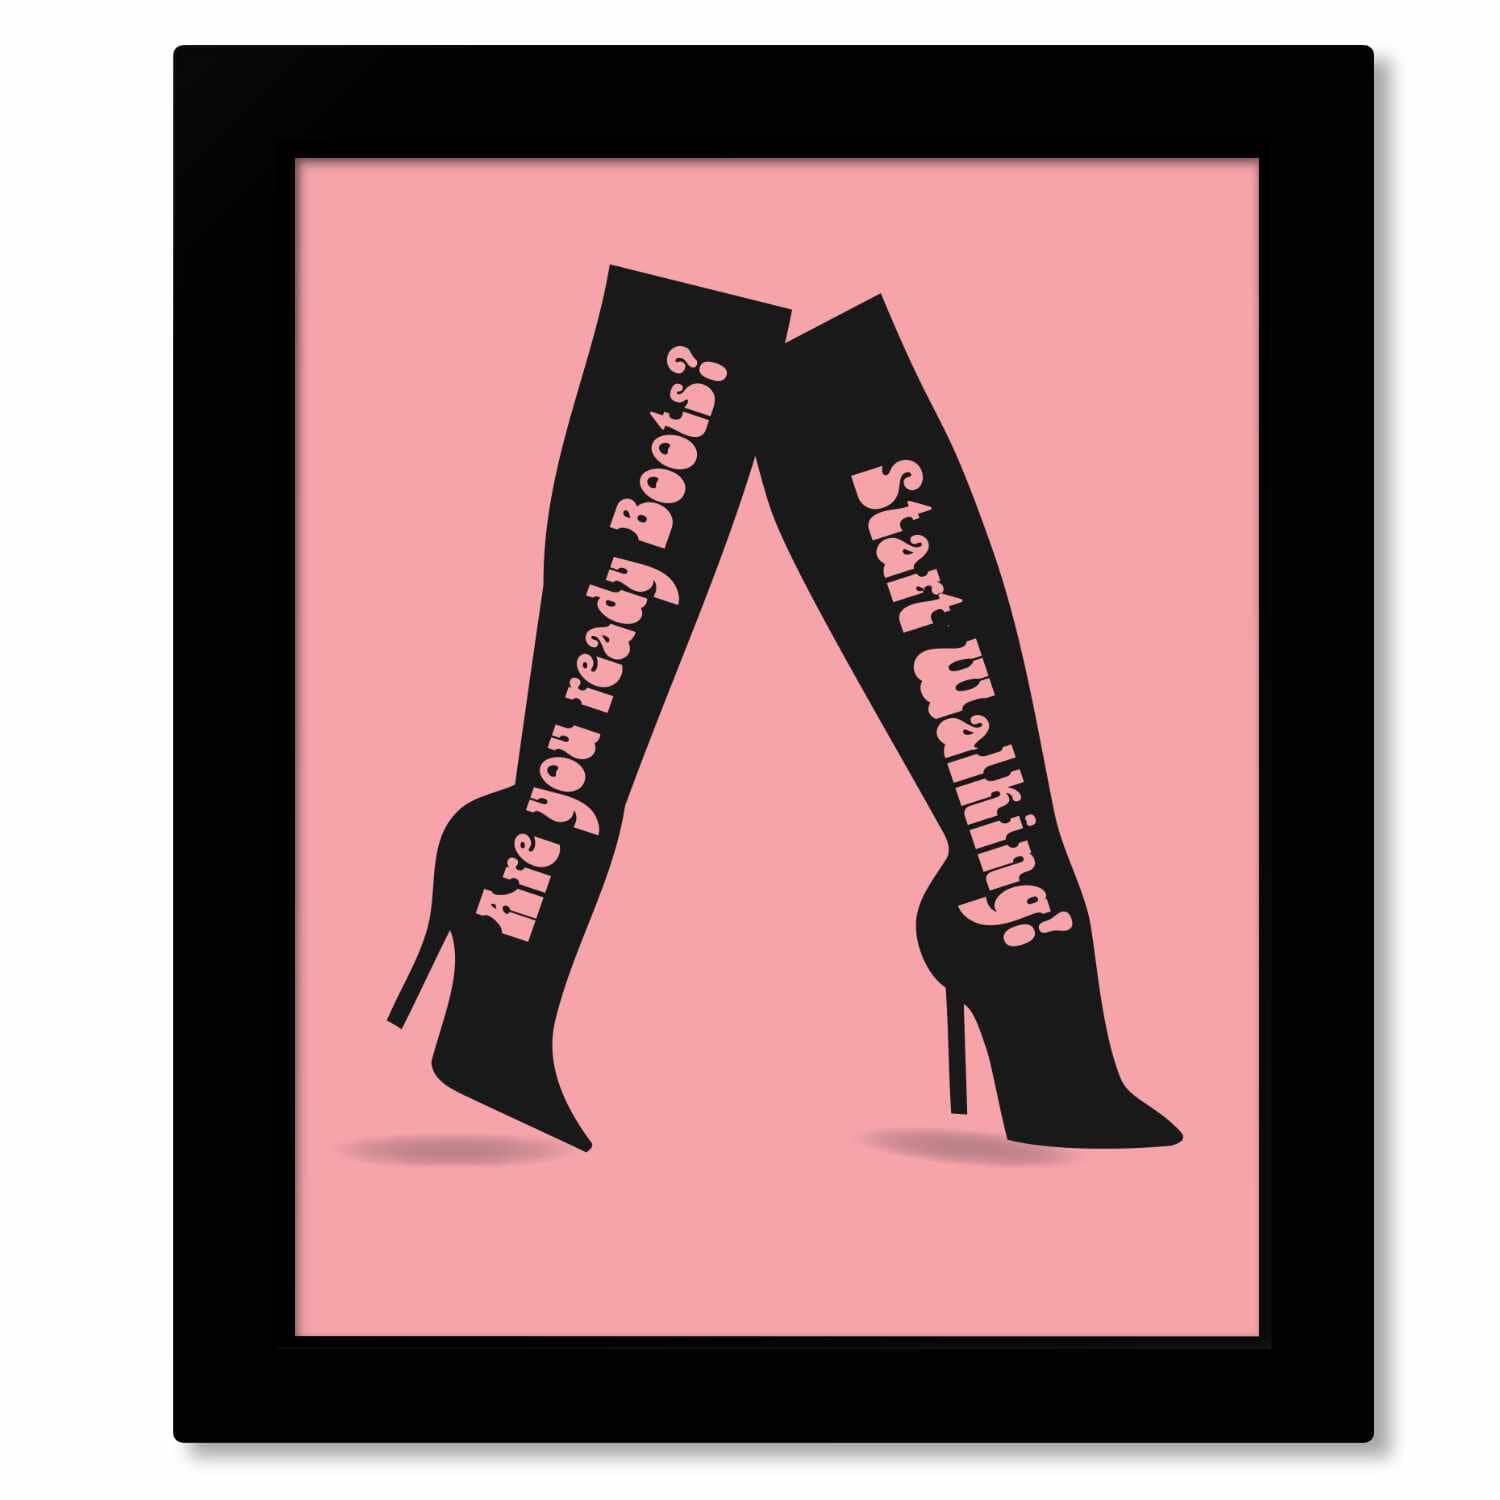 These Boots Are Made for Walkin' by Nancy Sinatra - 60s Art Song Lyrics Art Song Lyrics Art 8x10 Framed Print (without mat) 